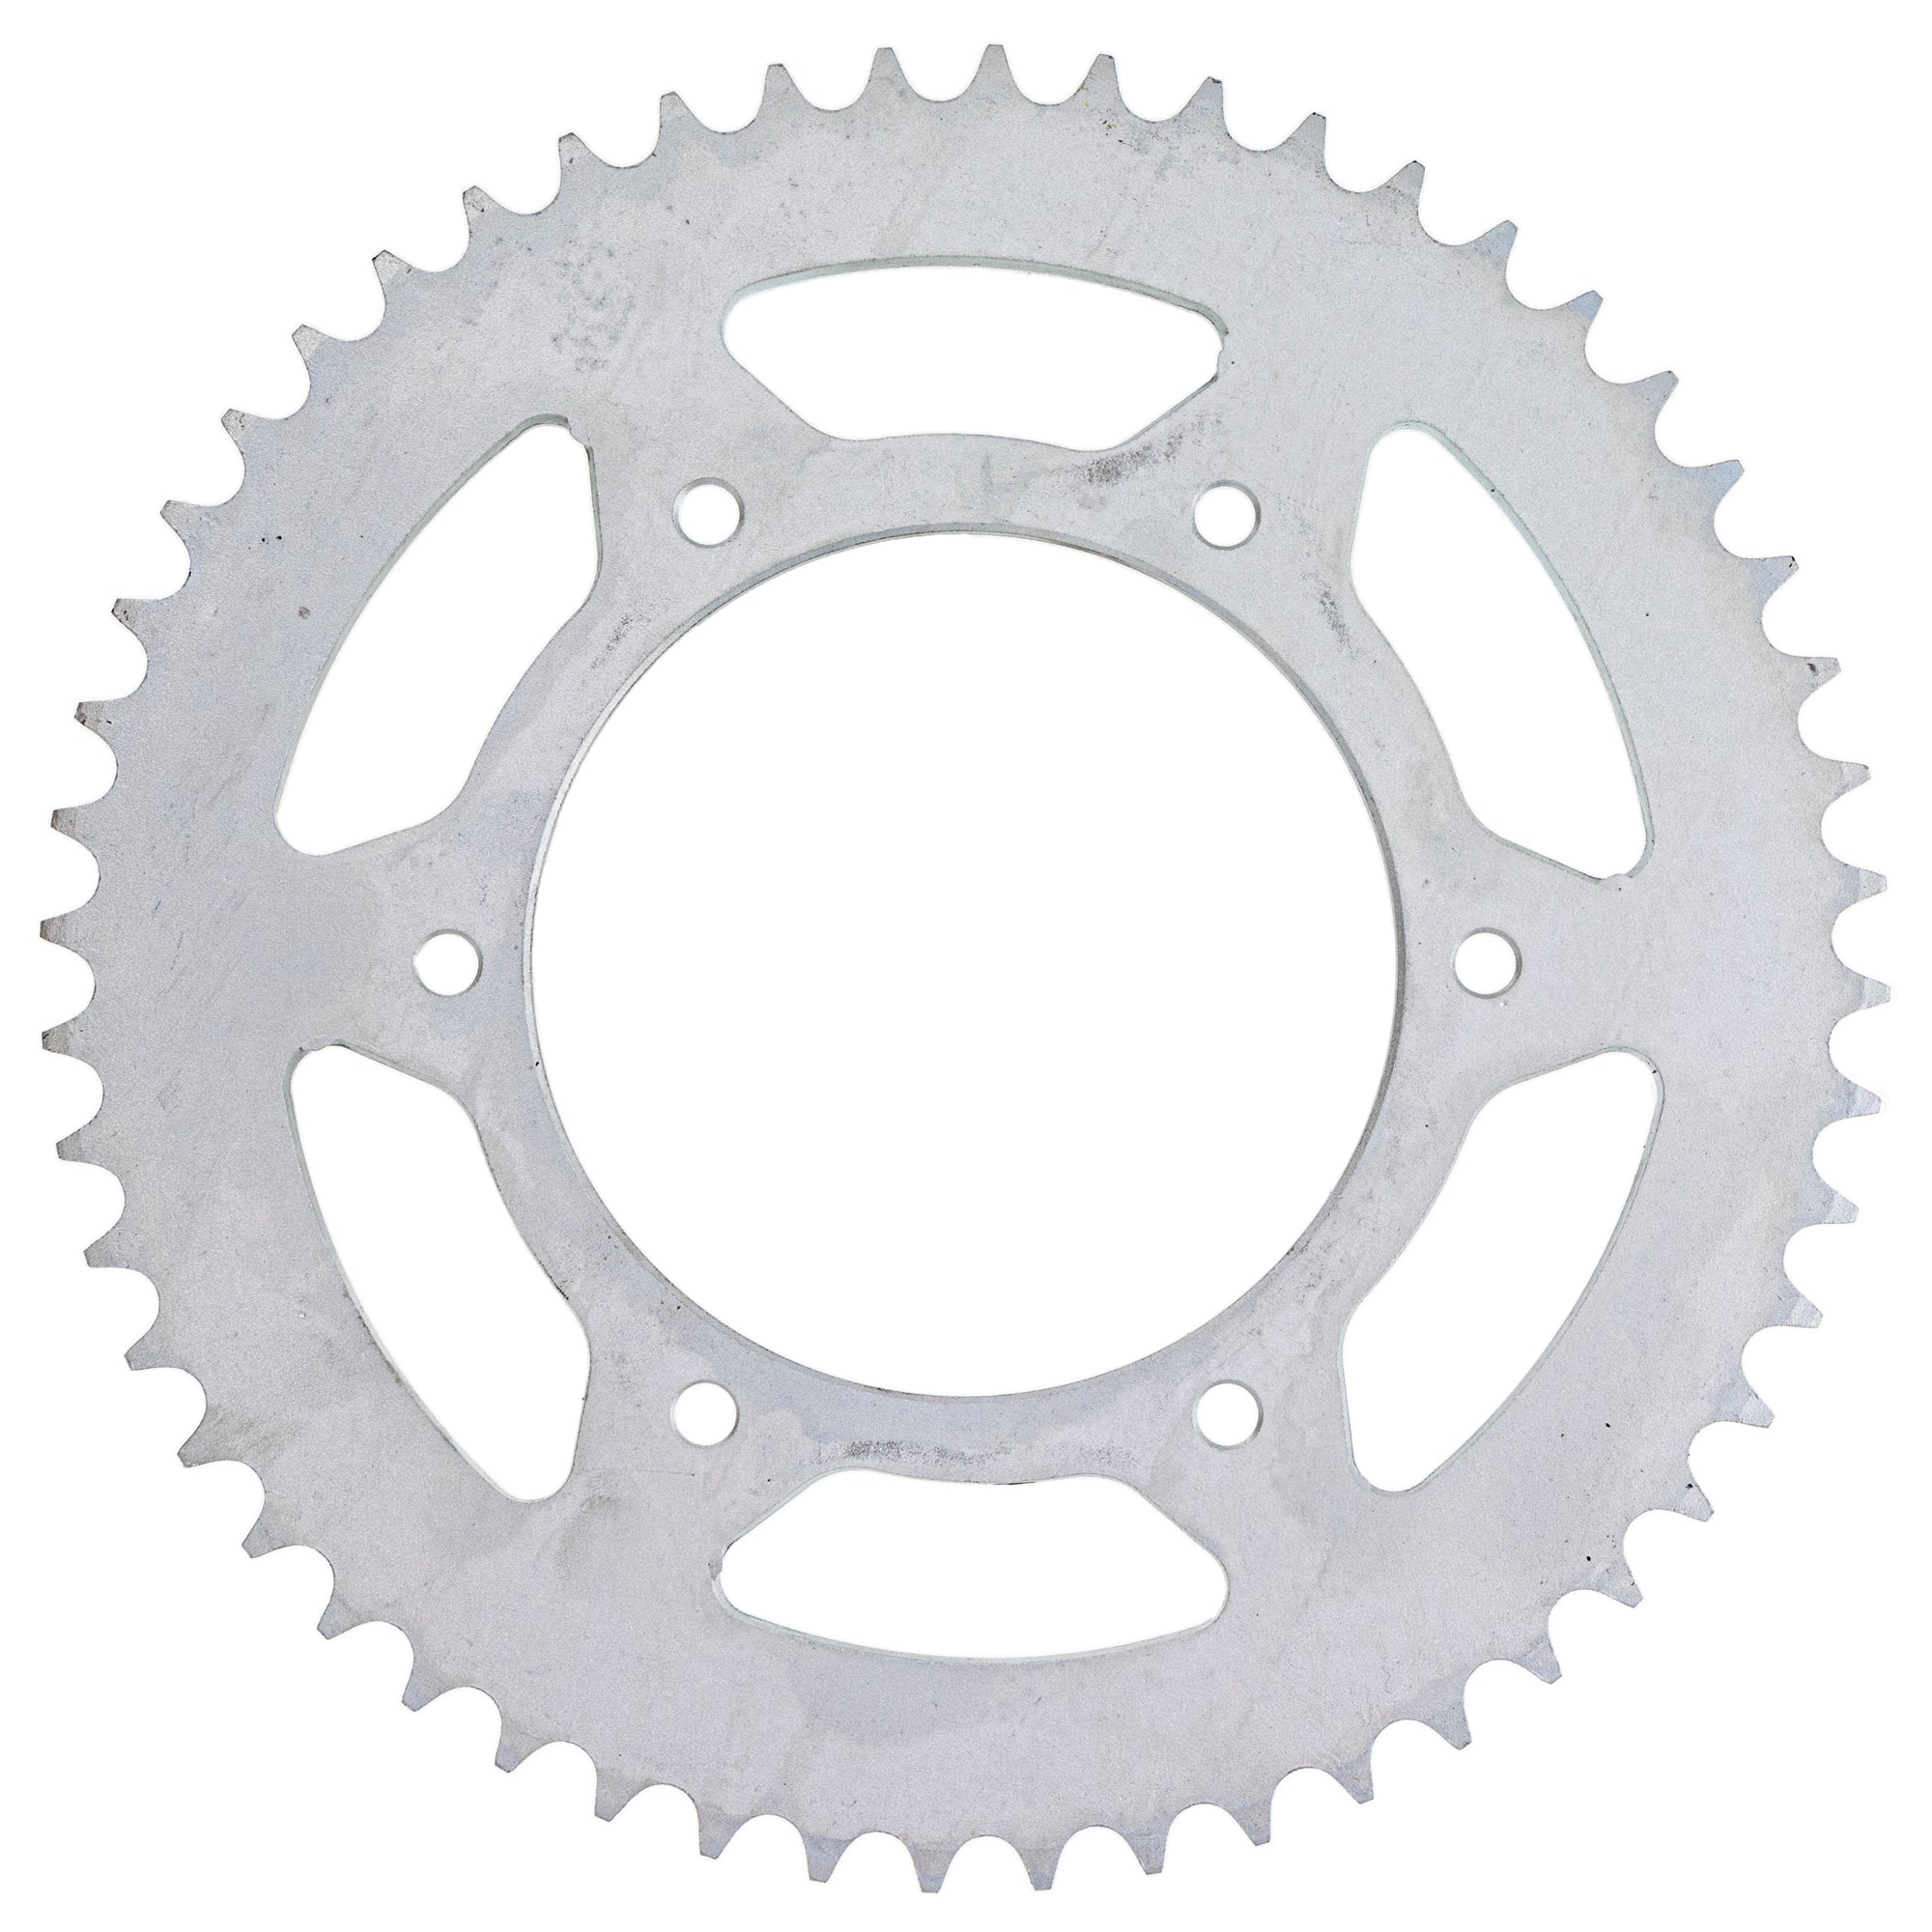 520 Pitch Front 14T Rear 52T Drive Sprocket Kit for KTM 250 450 300